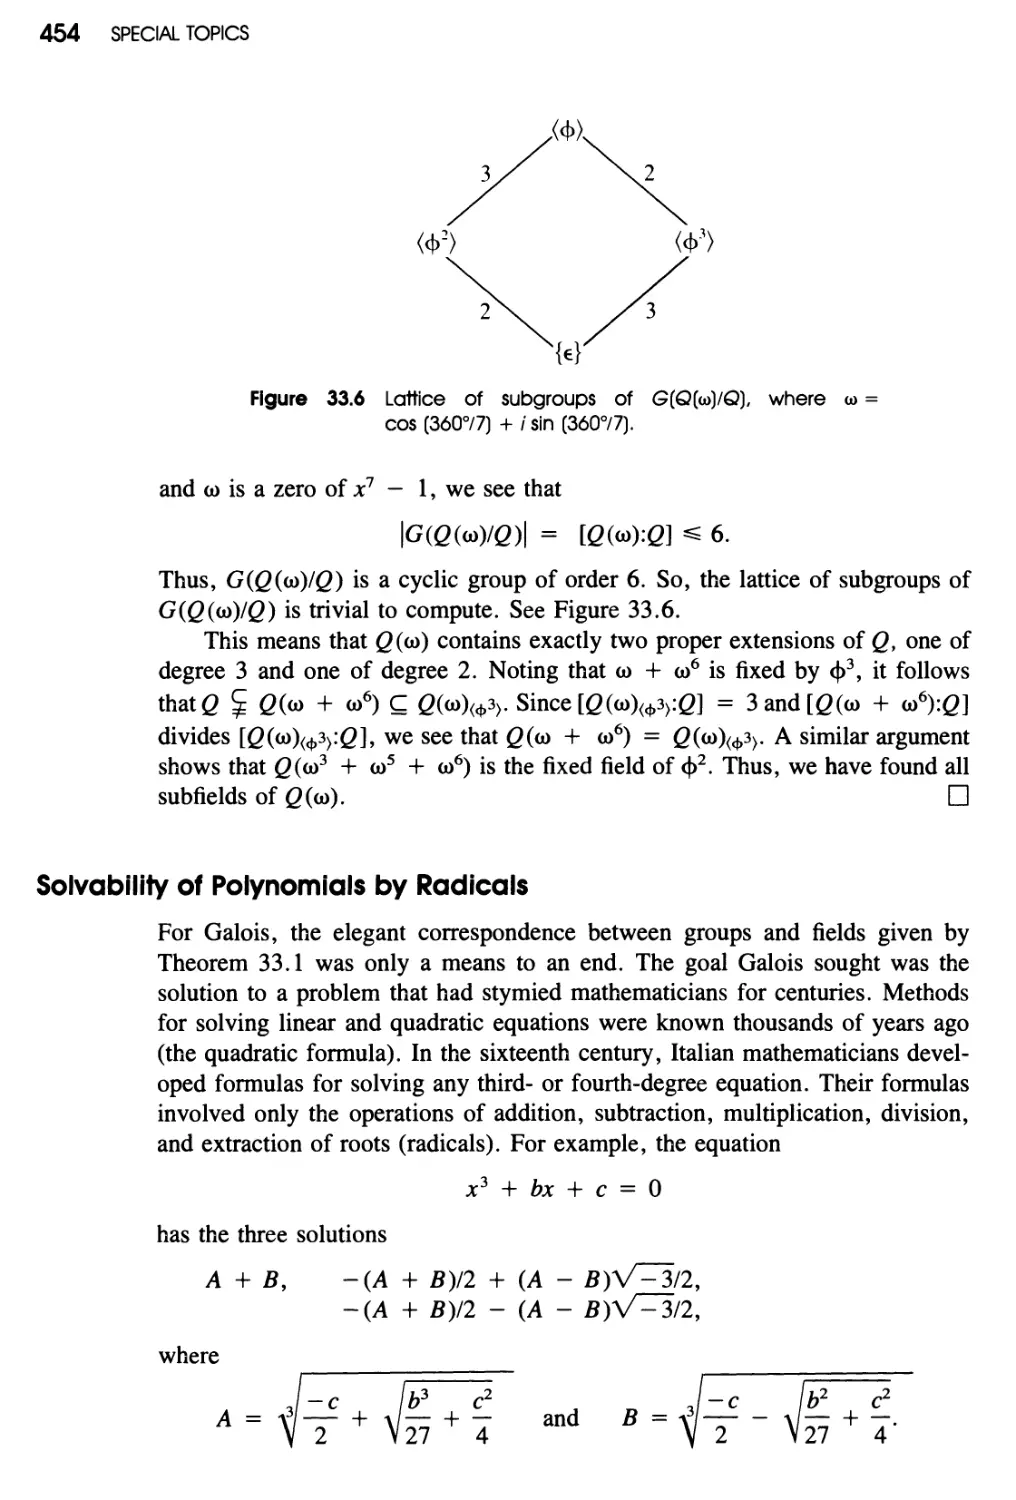 Solvability of Polynomials by Radicals